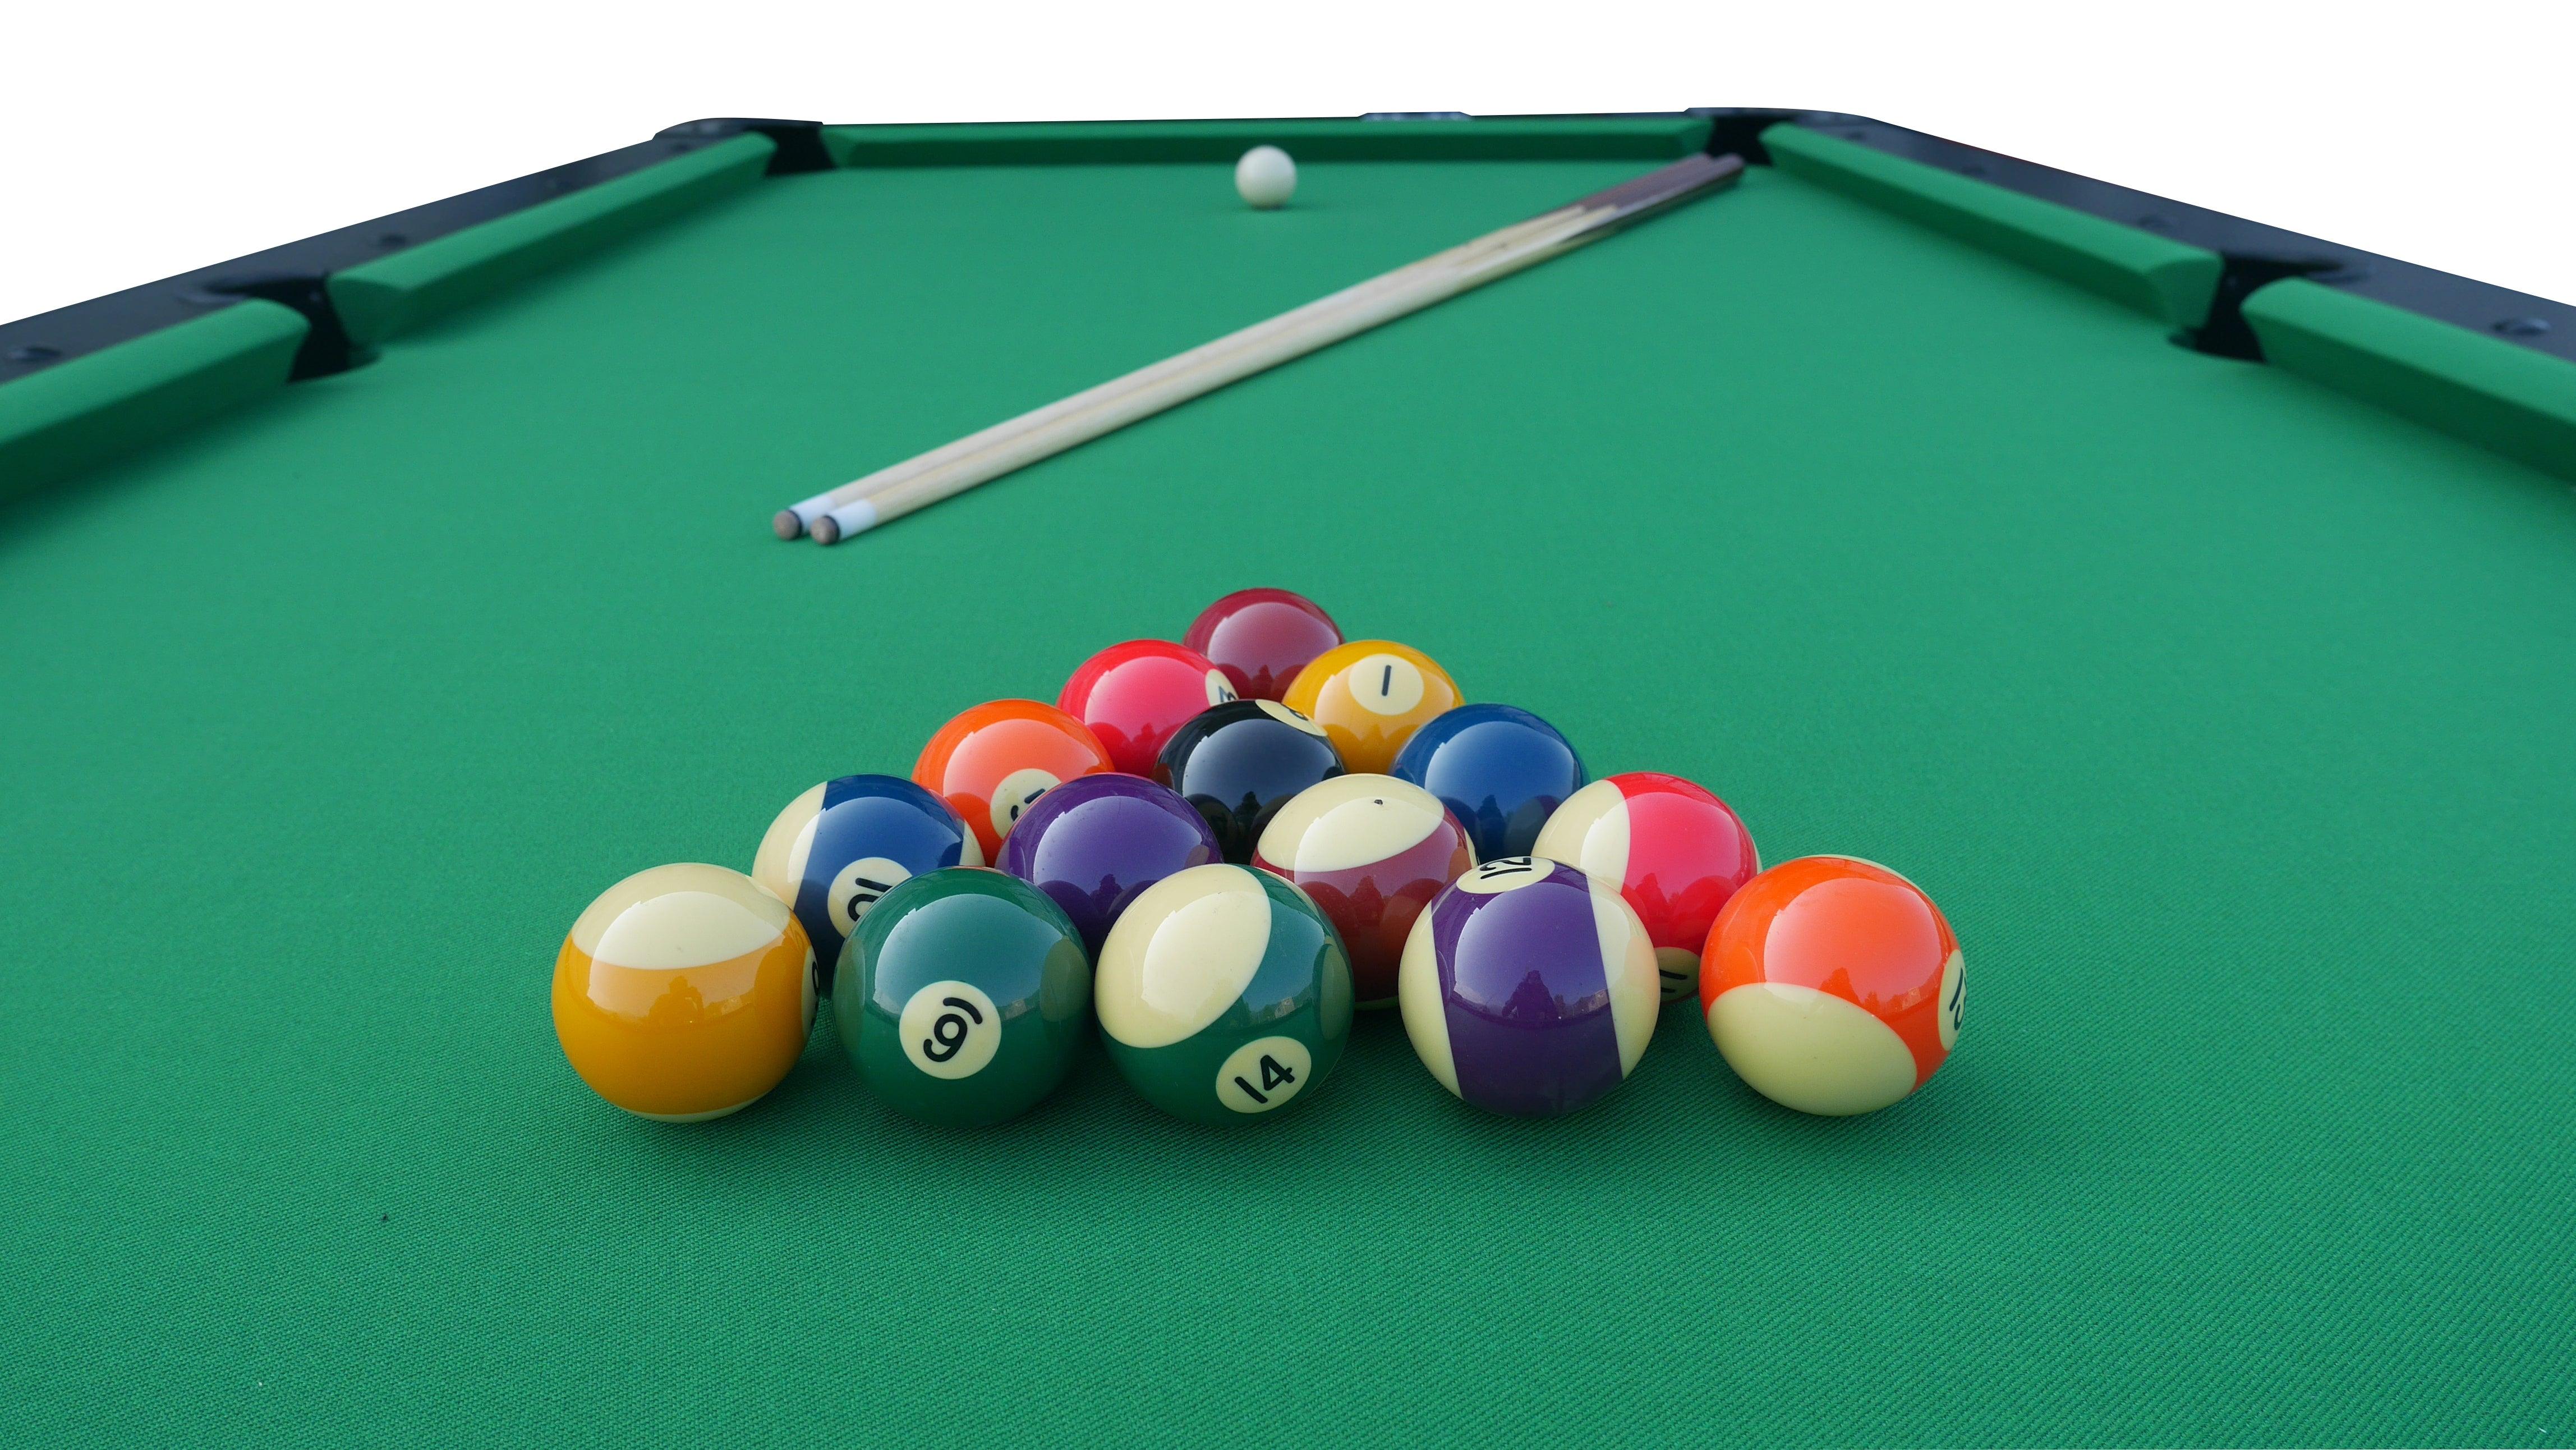 Roberto Sports First Pool 200 (7ft) Pool Table - Bassline Retail